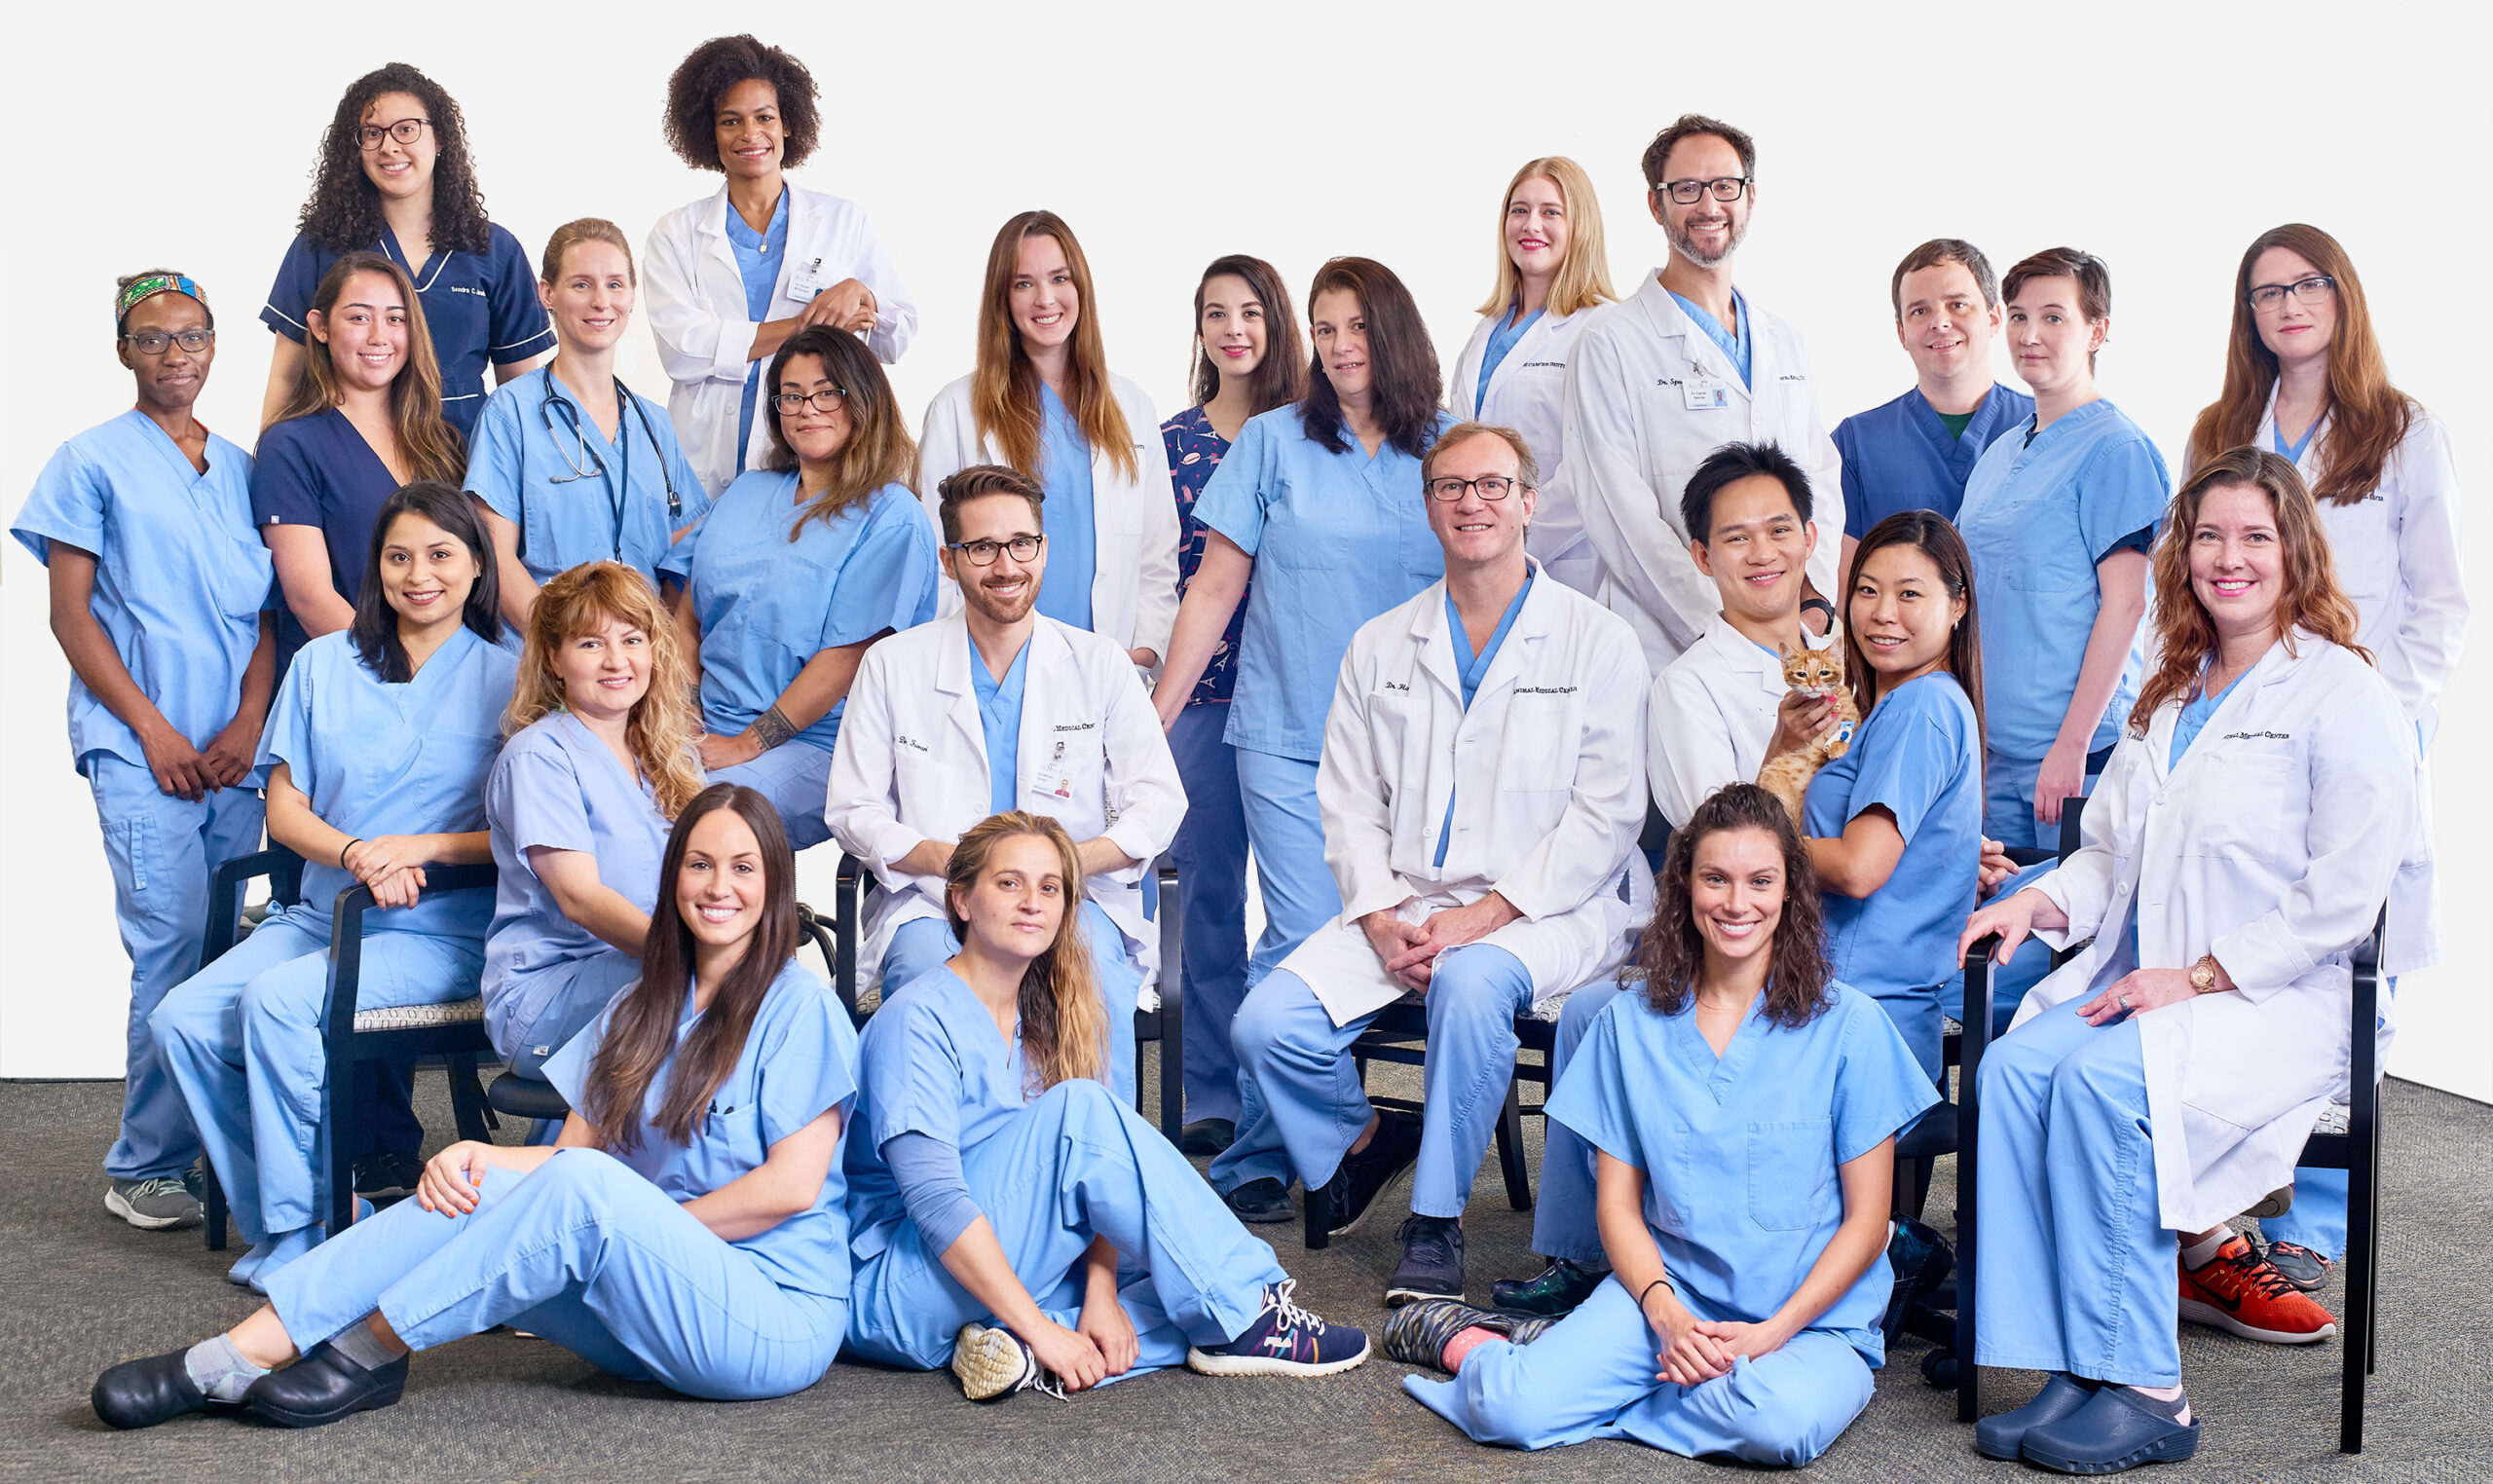 The Surgery Team at the Animal Medical Center of New York City